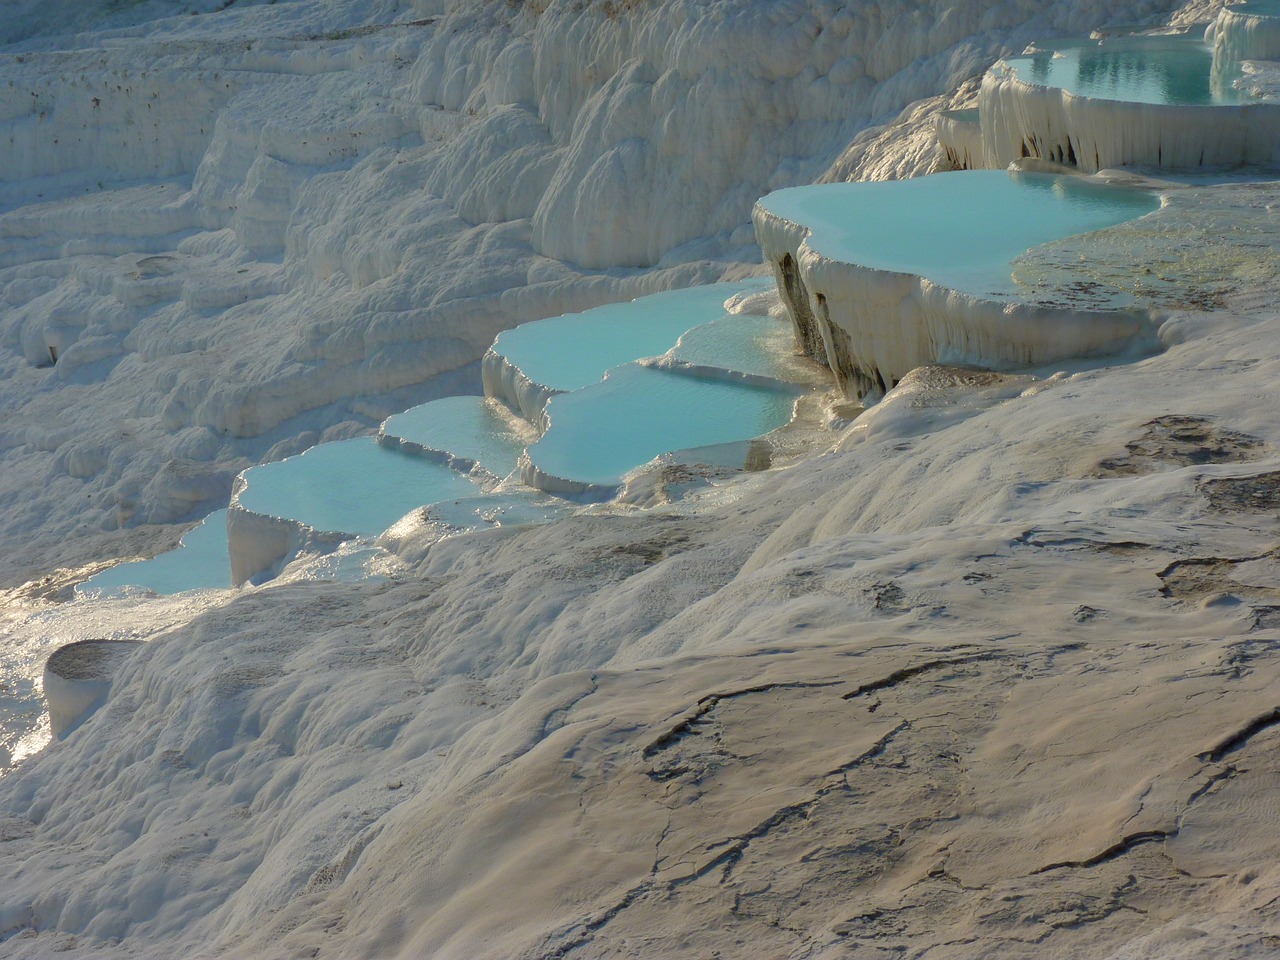 Pamukkale is one of the top attractions in Turkey